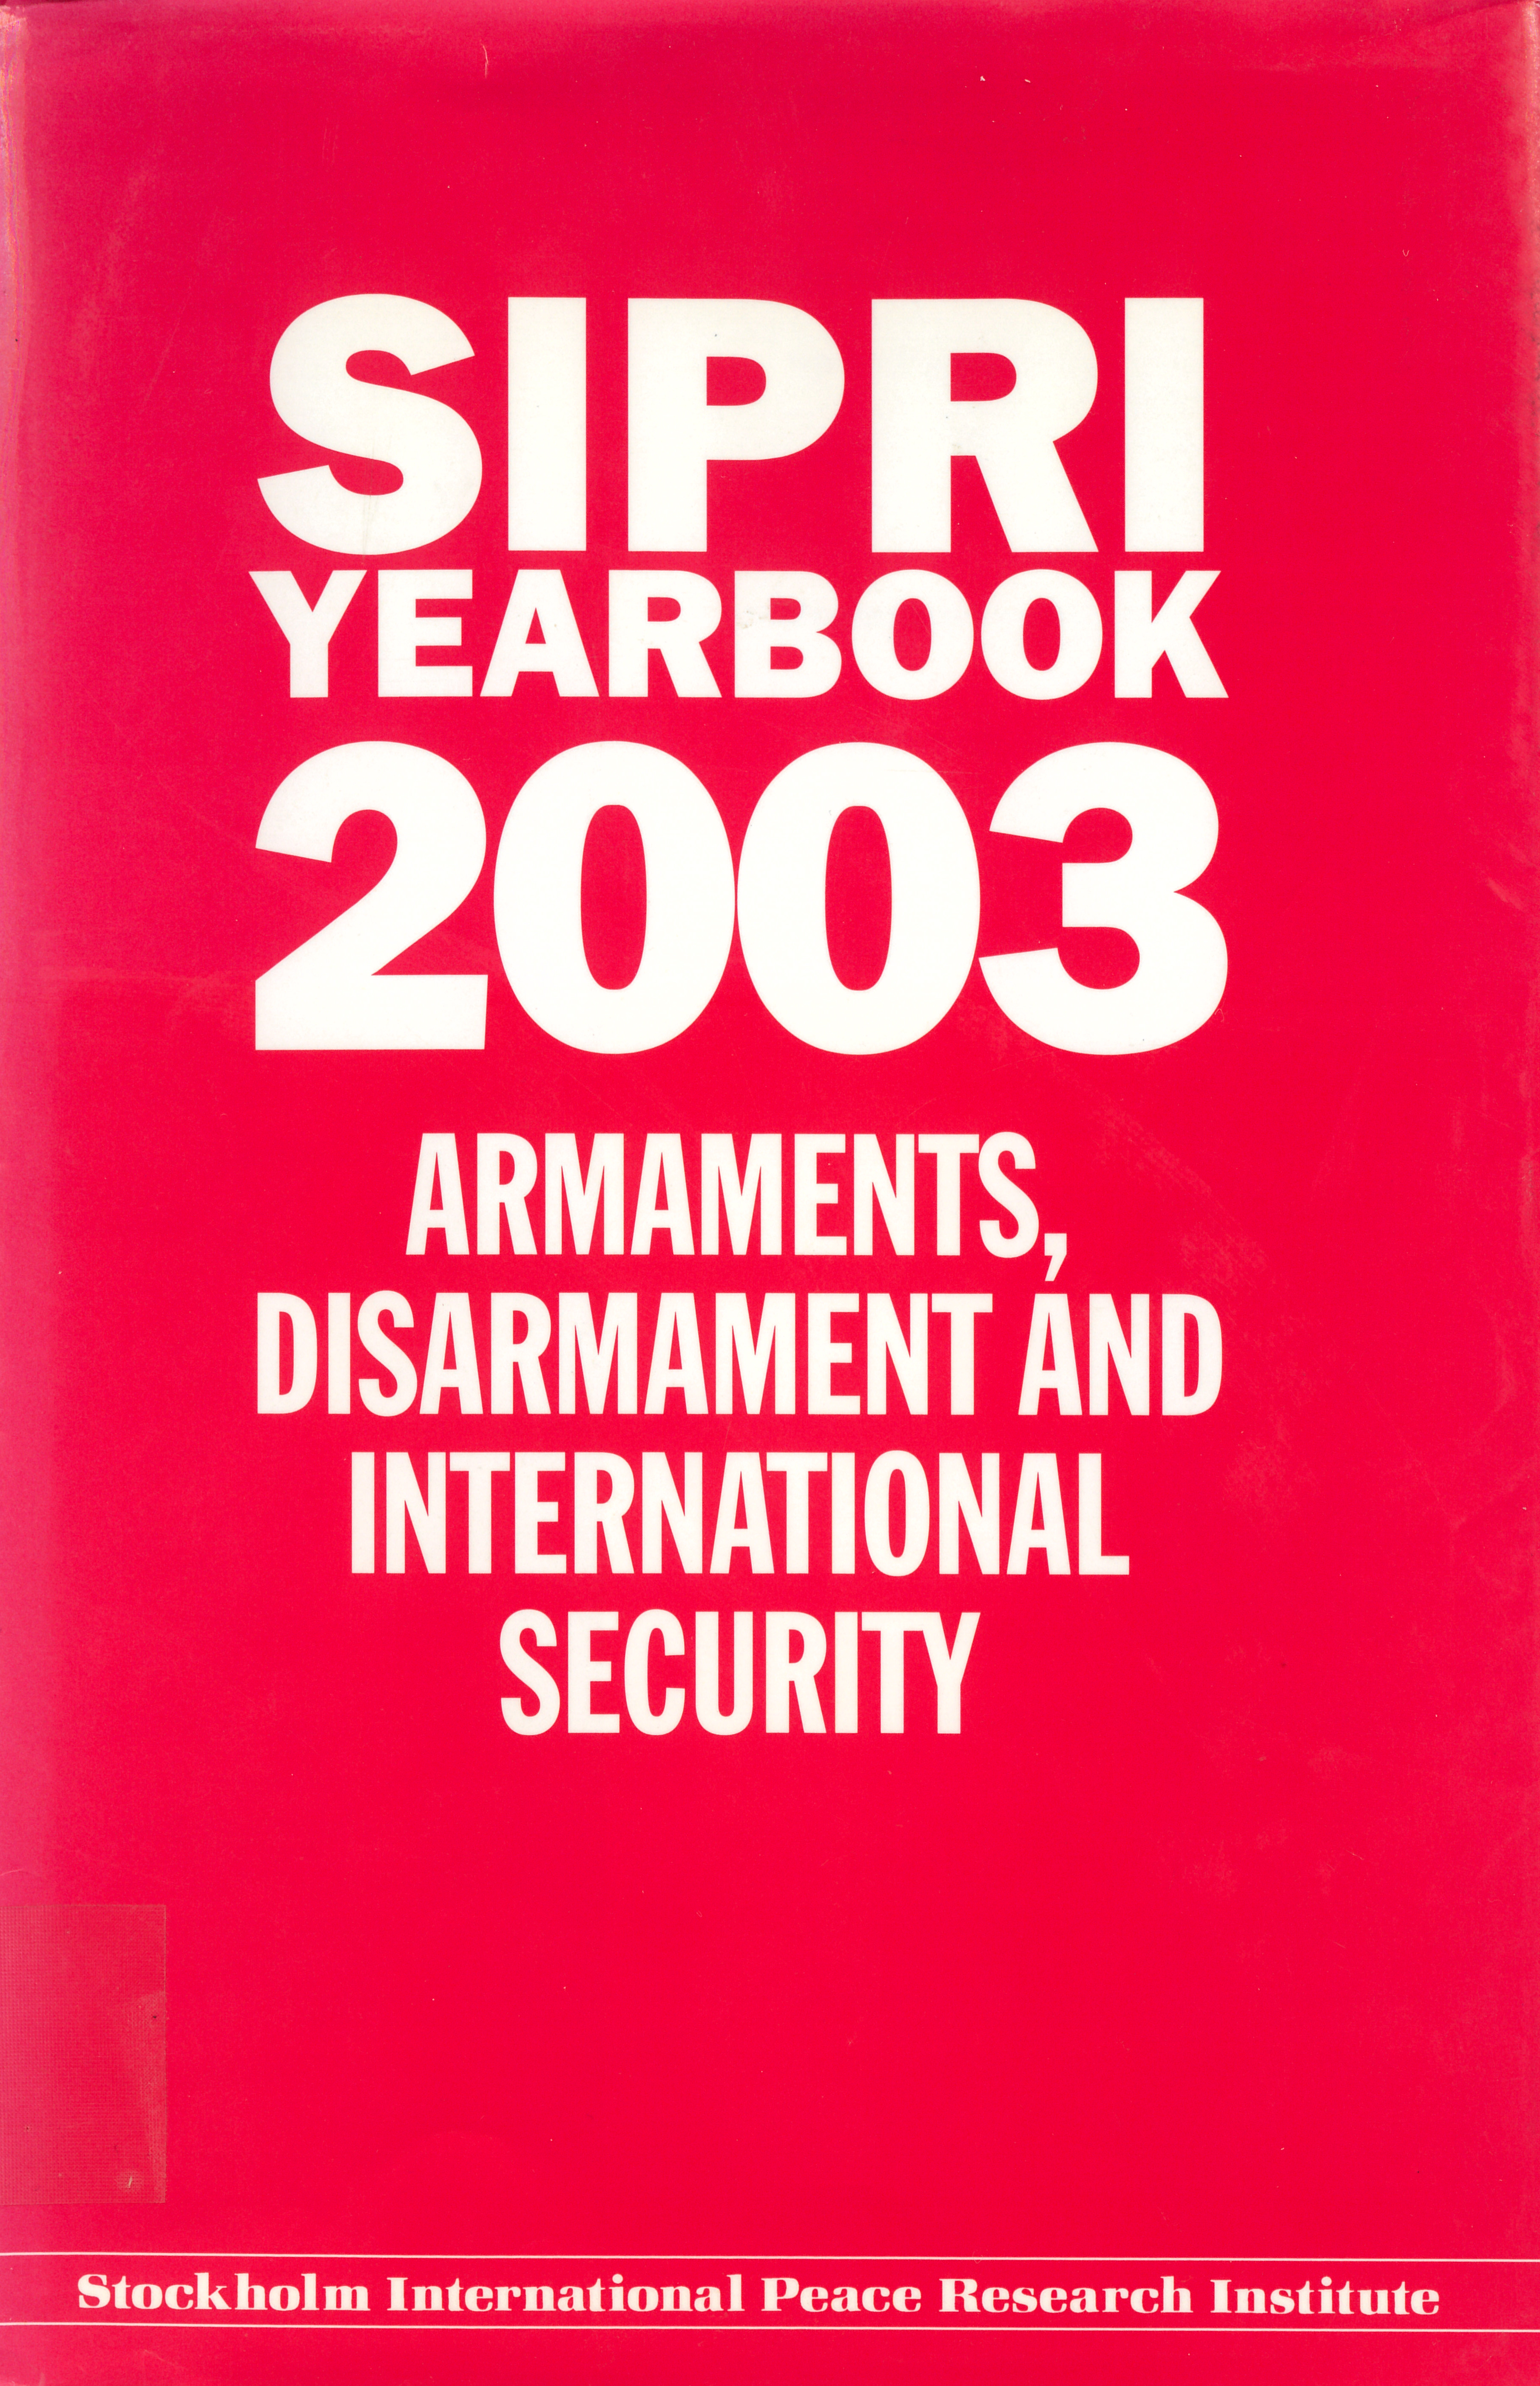 SIPRI yearbook 2003 cover